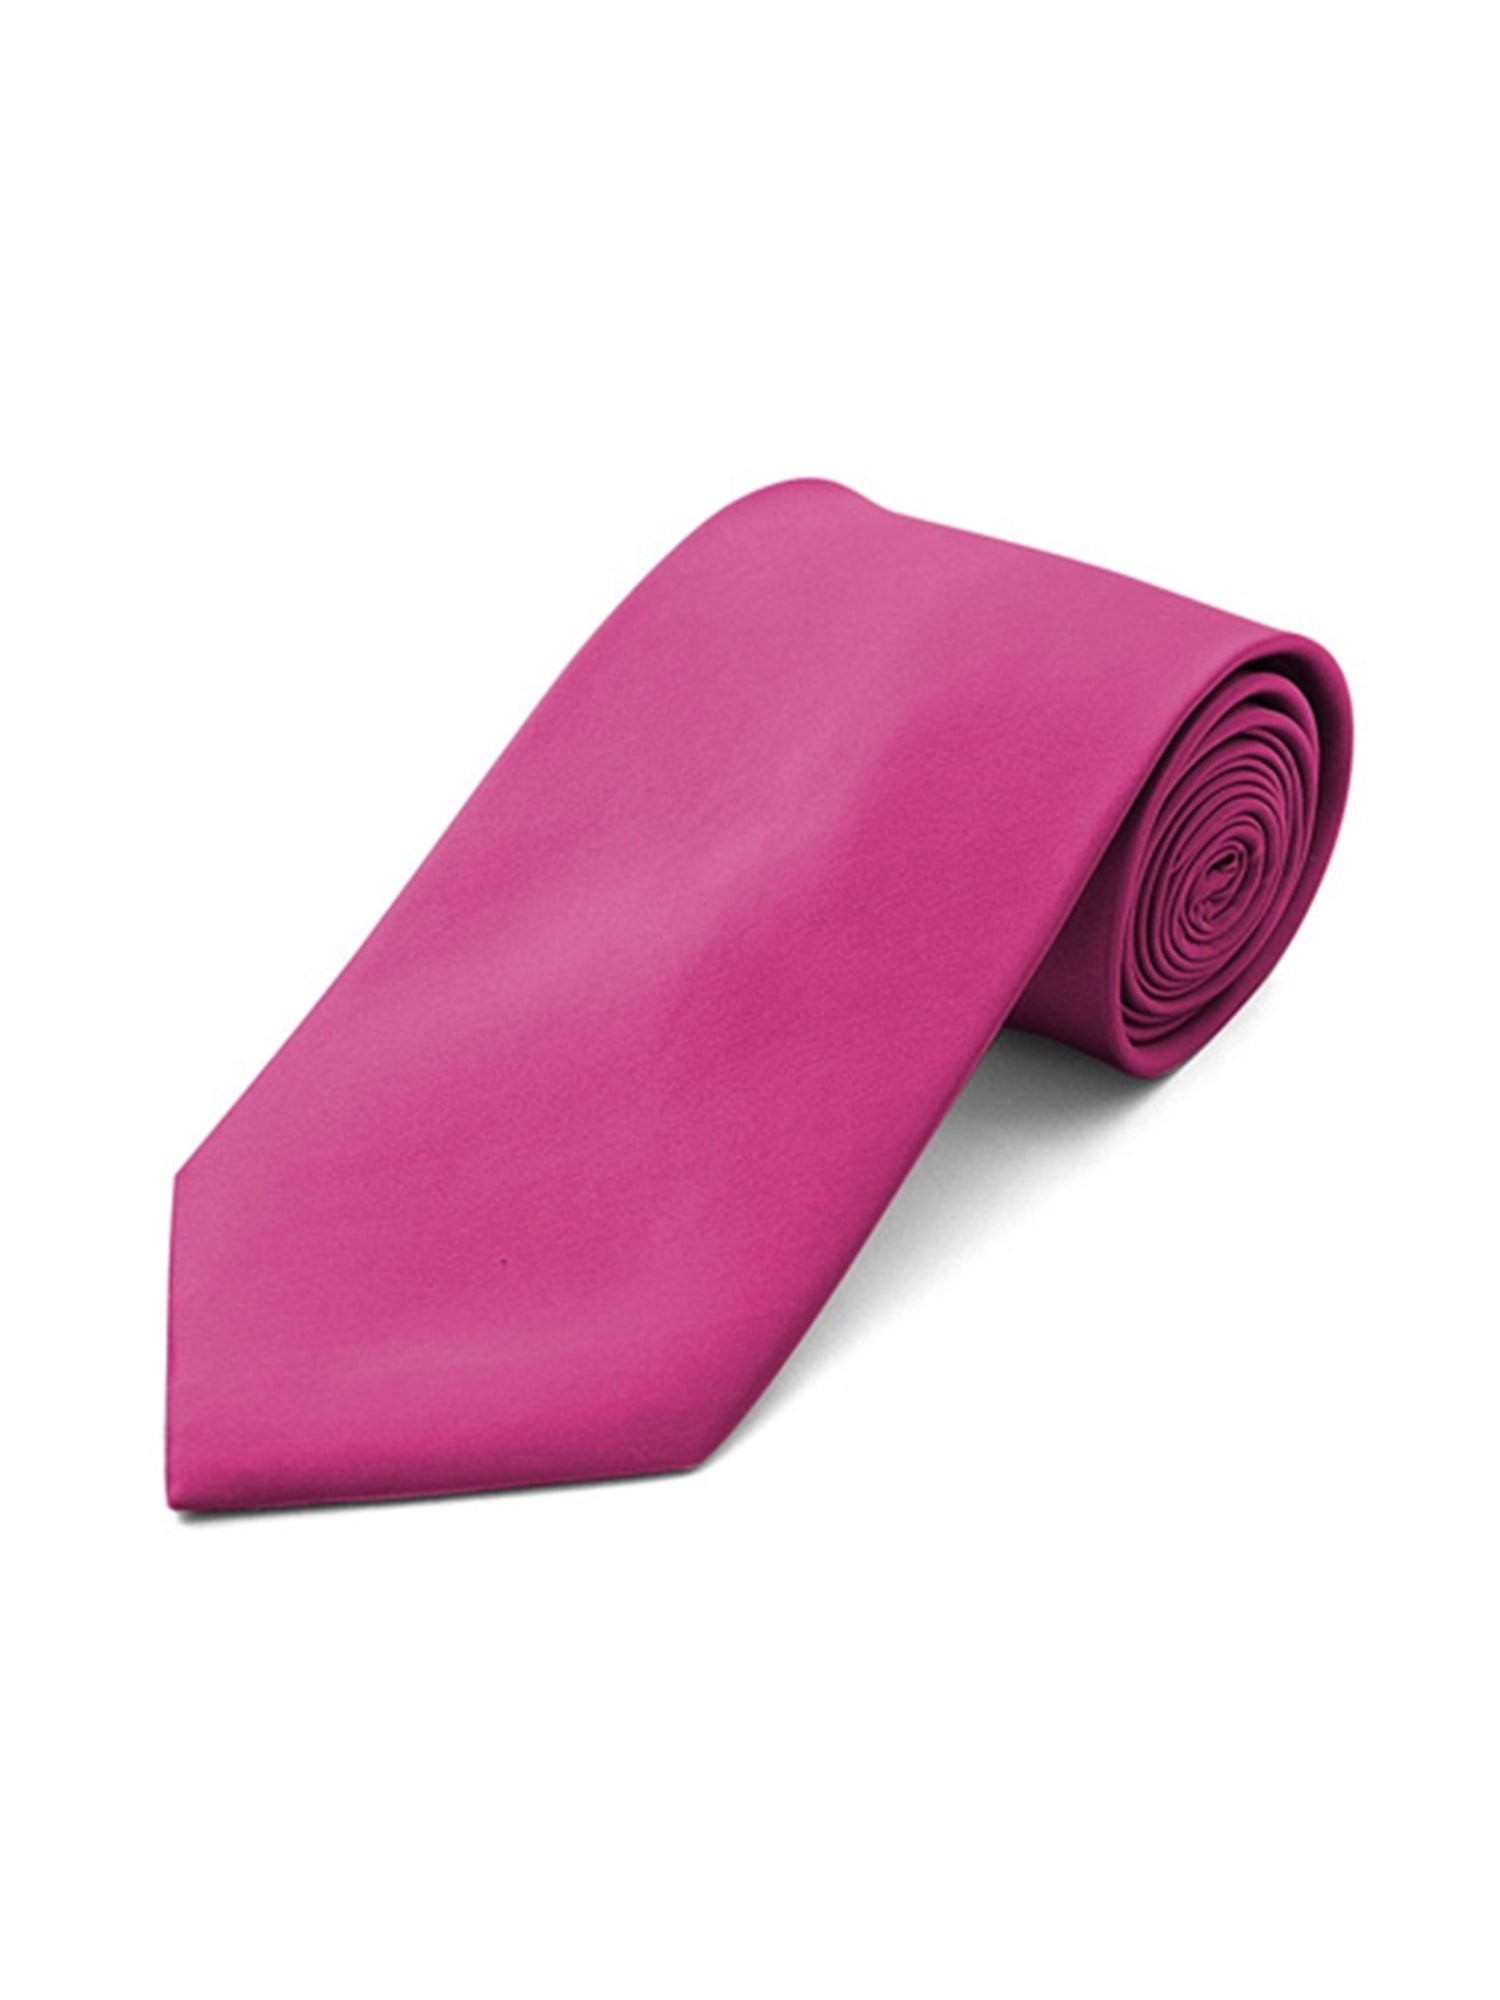 Men's Solid Color 2.75 Inch Wide And 57 Inch Long Slim Neckties Neck Tie TheDapperTie Fuchsia  